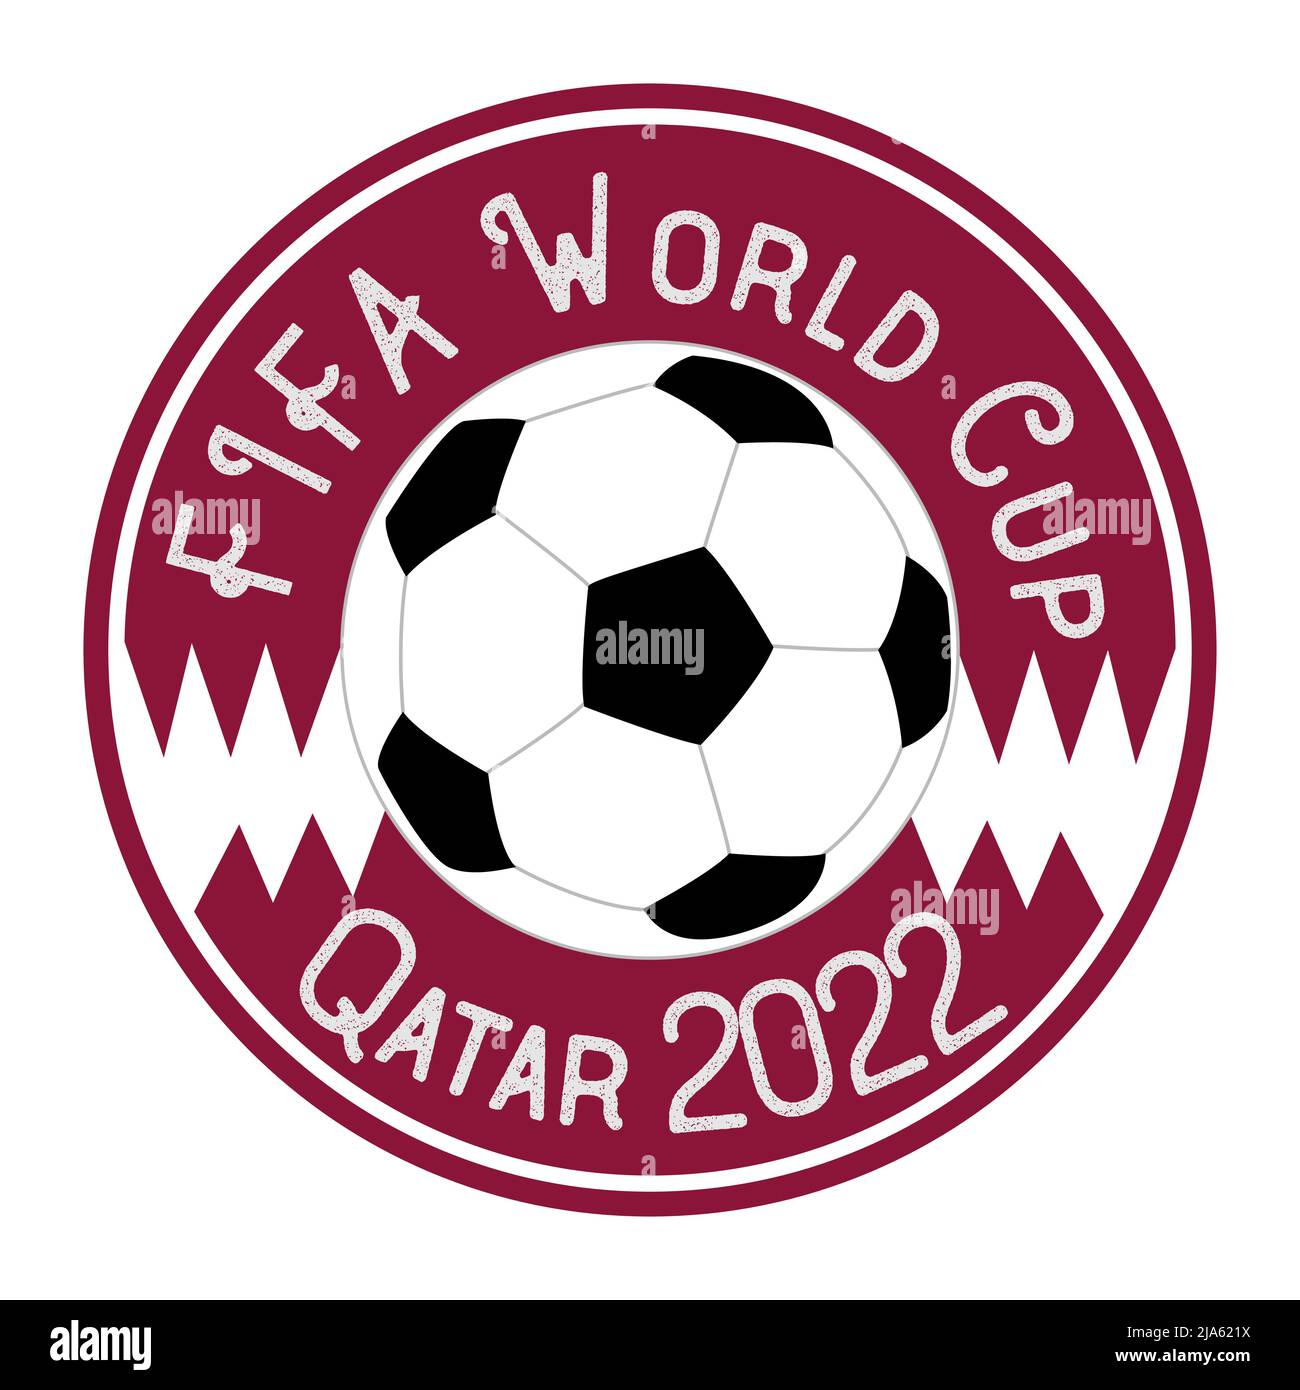 Fifa world cup 2022 qatar Stock Vector Images - Alamy